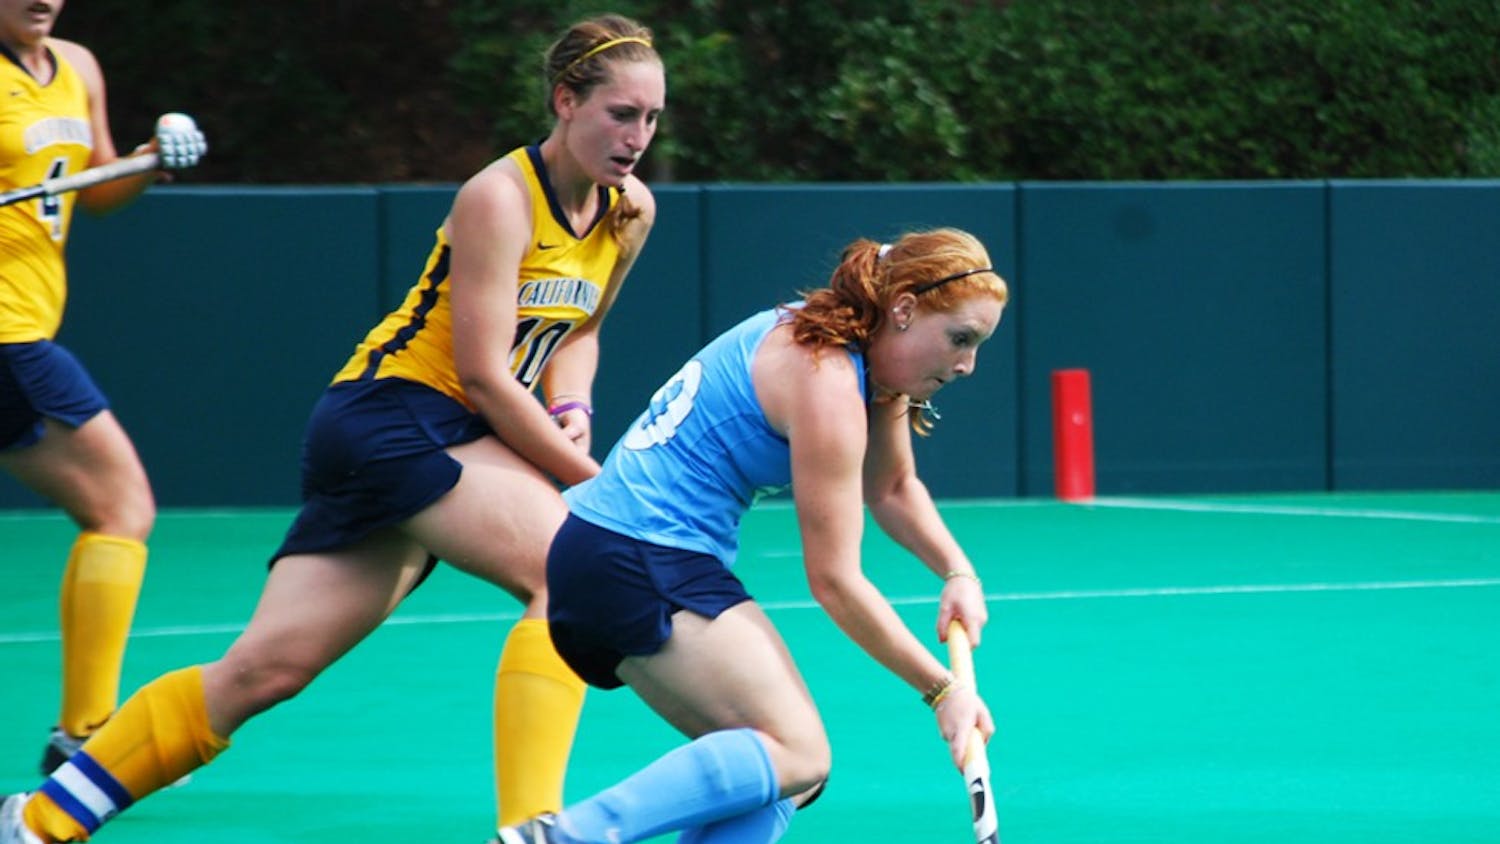 Freshman forward Sinead Loughran put seven of her eight shots on frame against California on Monday.
The Tar Heels put together 27 shots but only connected on one against their unranked opponent.